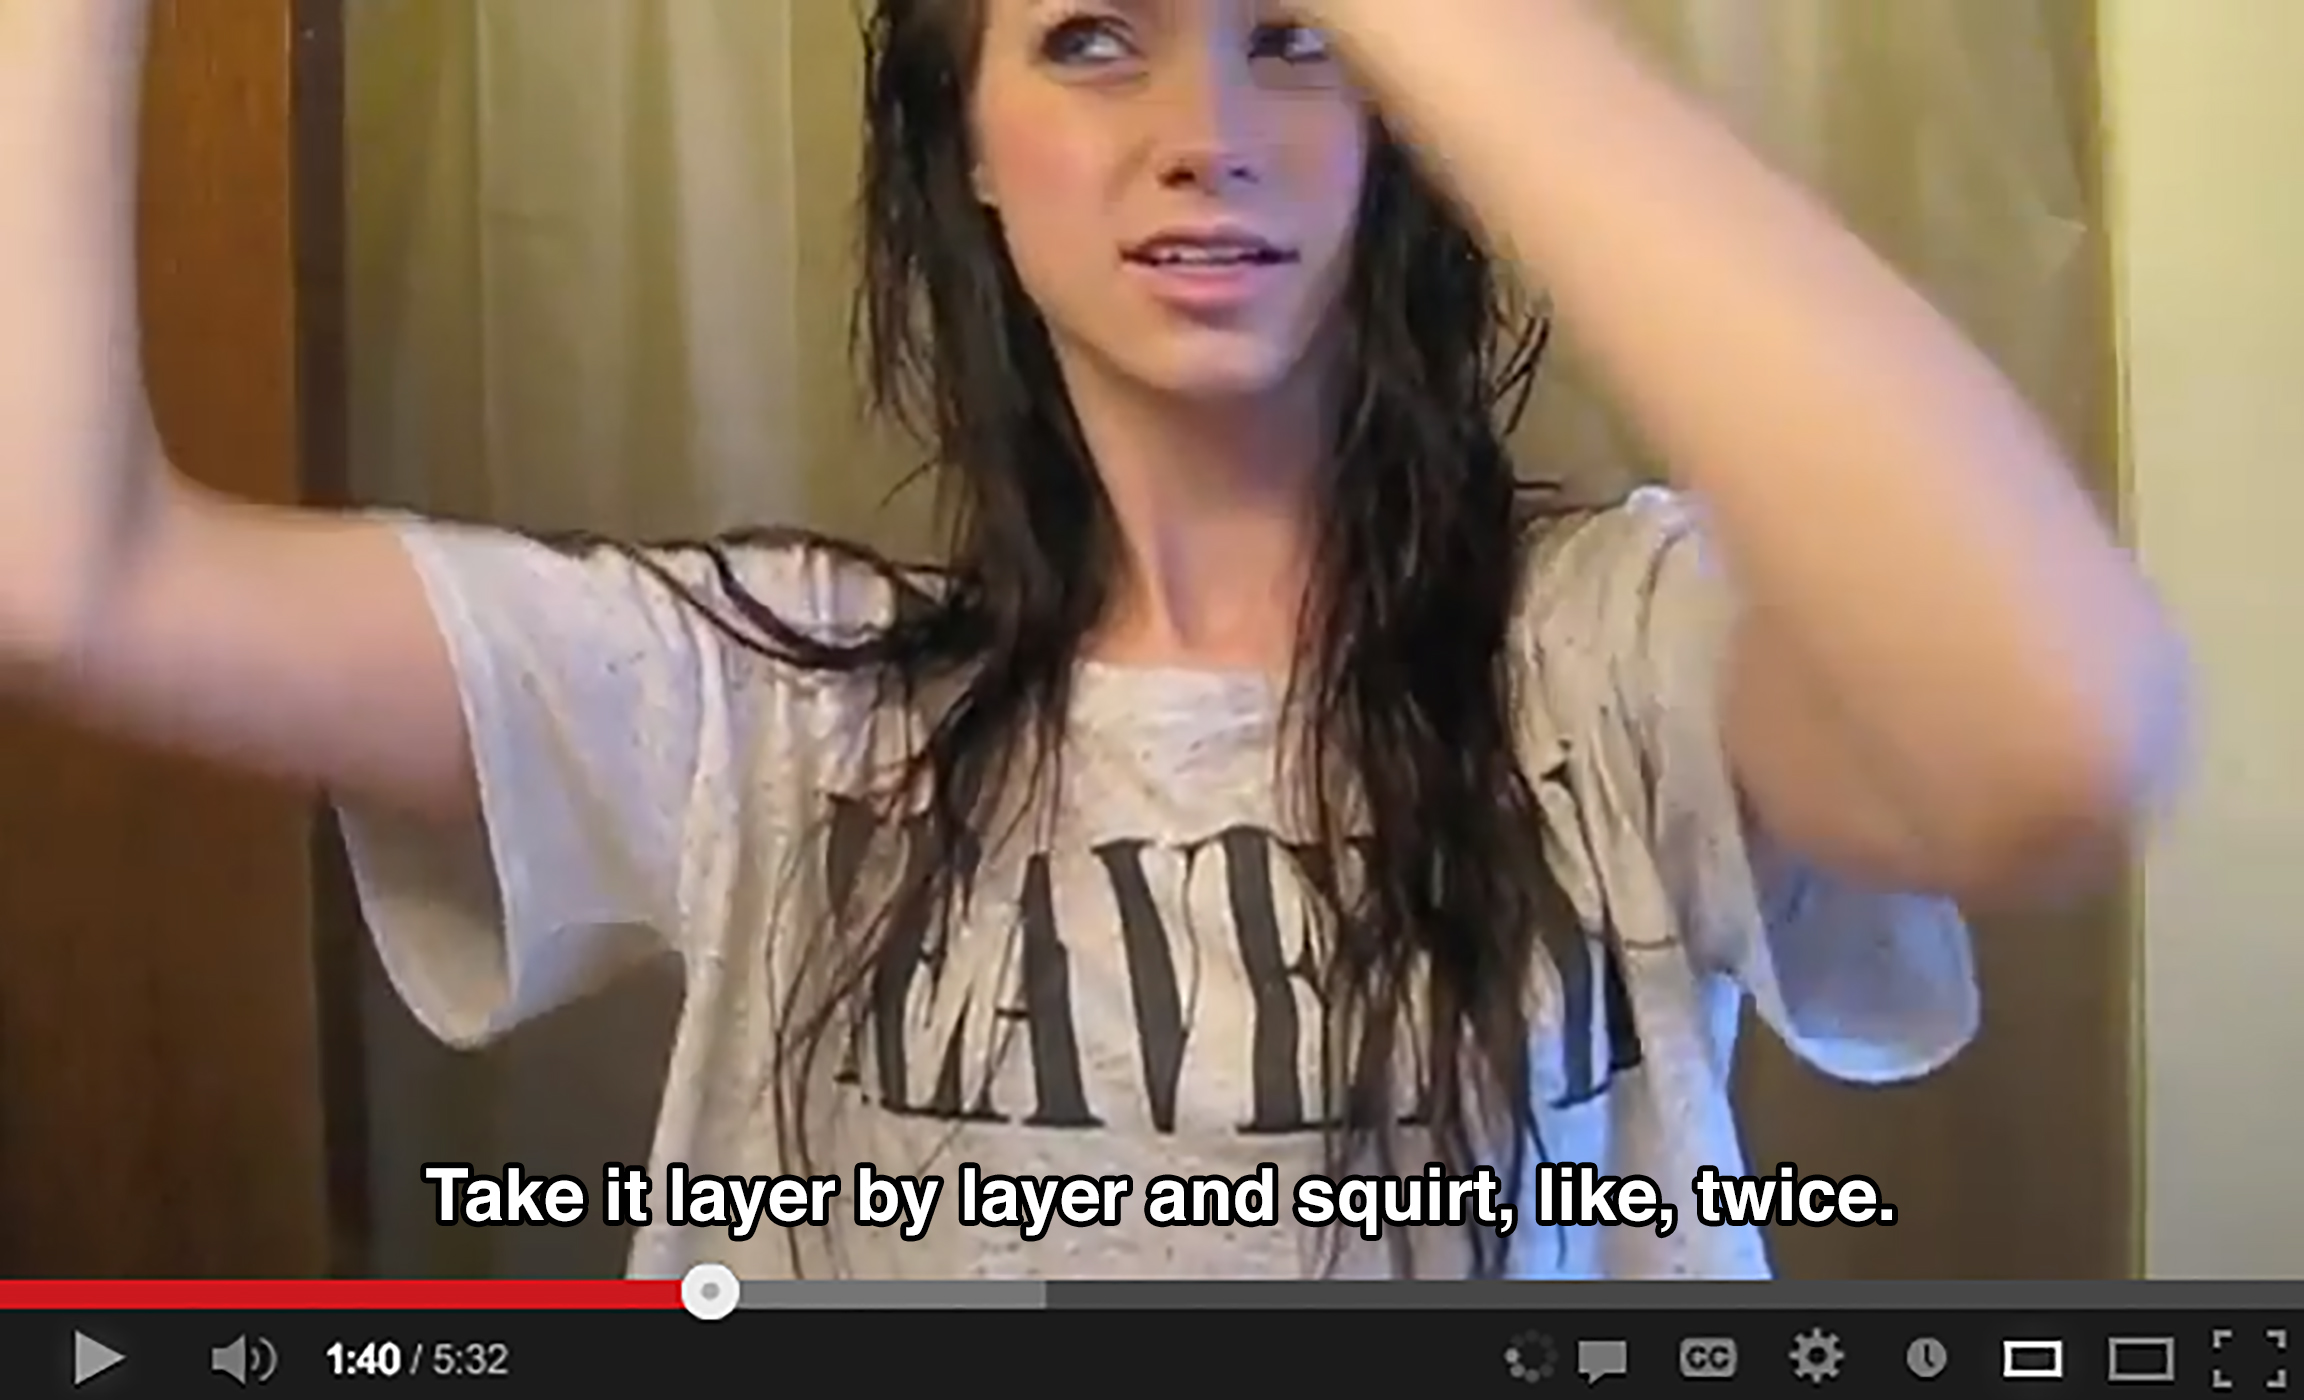 A teenager holds a section of her hair up offscreen and says: Take it layer by layer and squirt, like, twice.